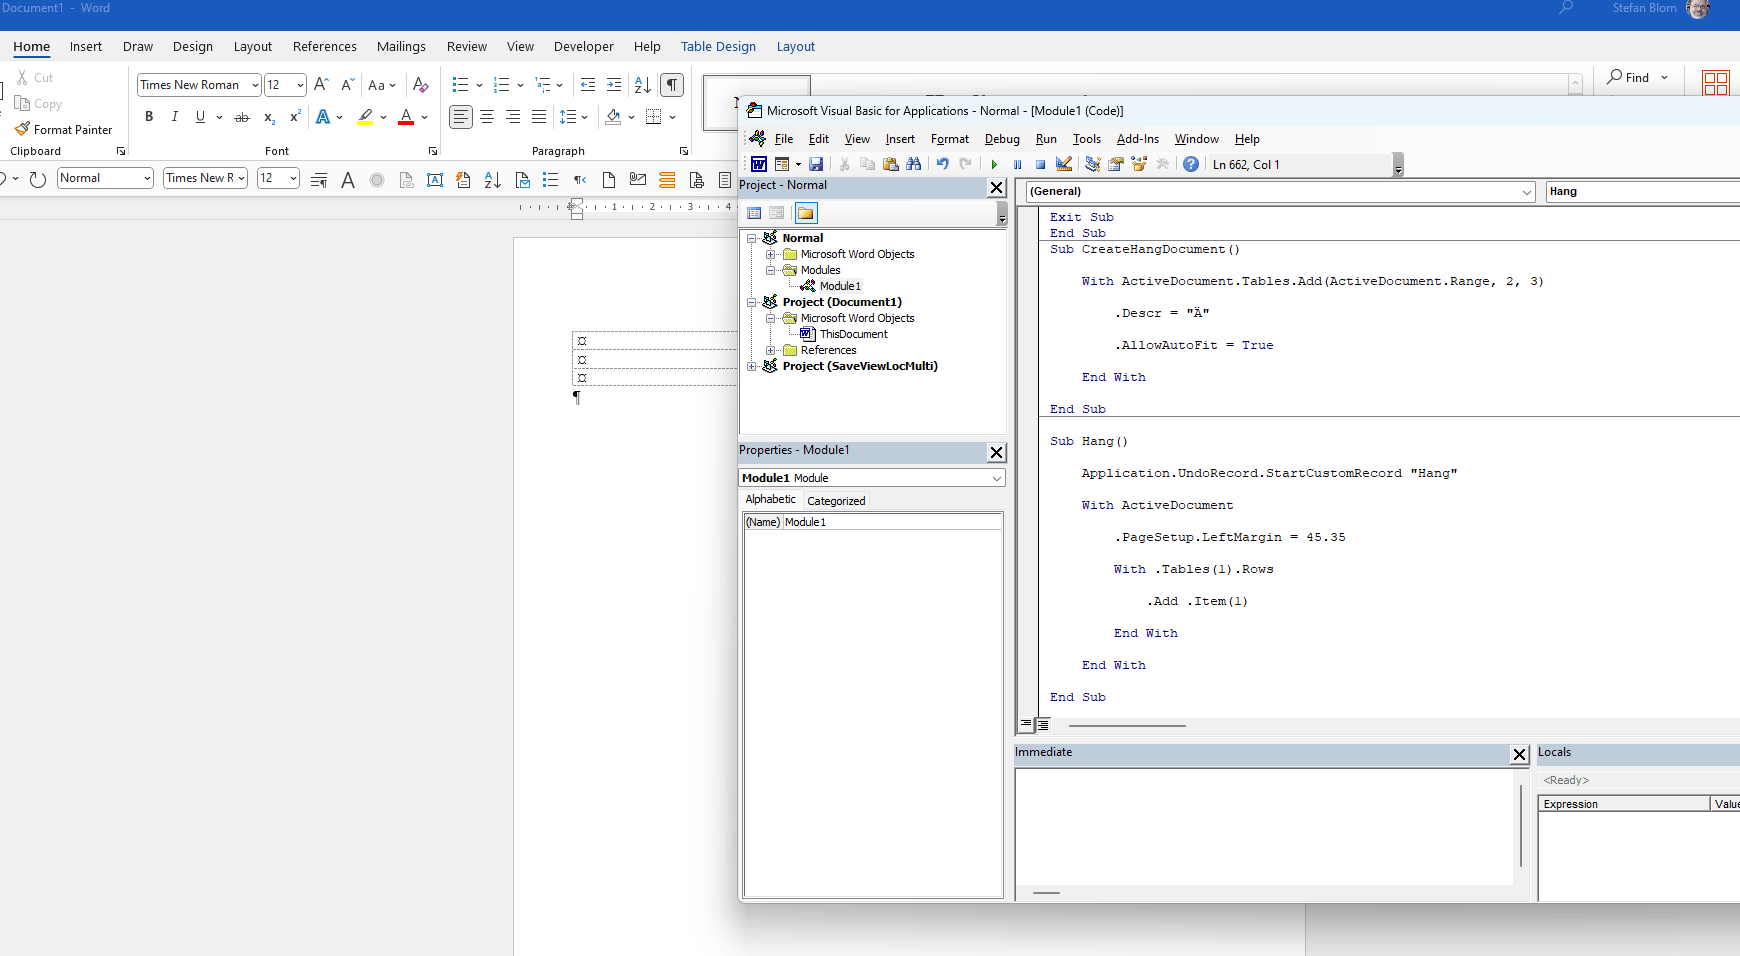 Why does Microsoft Word 2016 (16.0.5426.1000)MSO (16.0.5422.100 